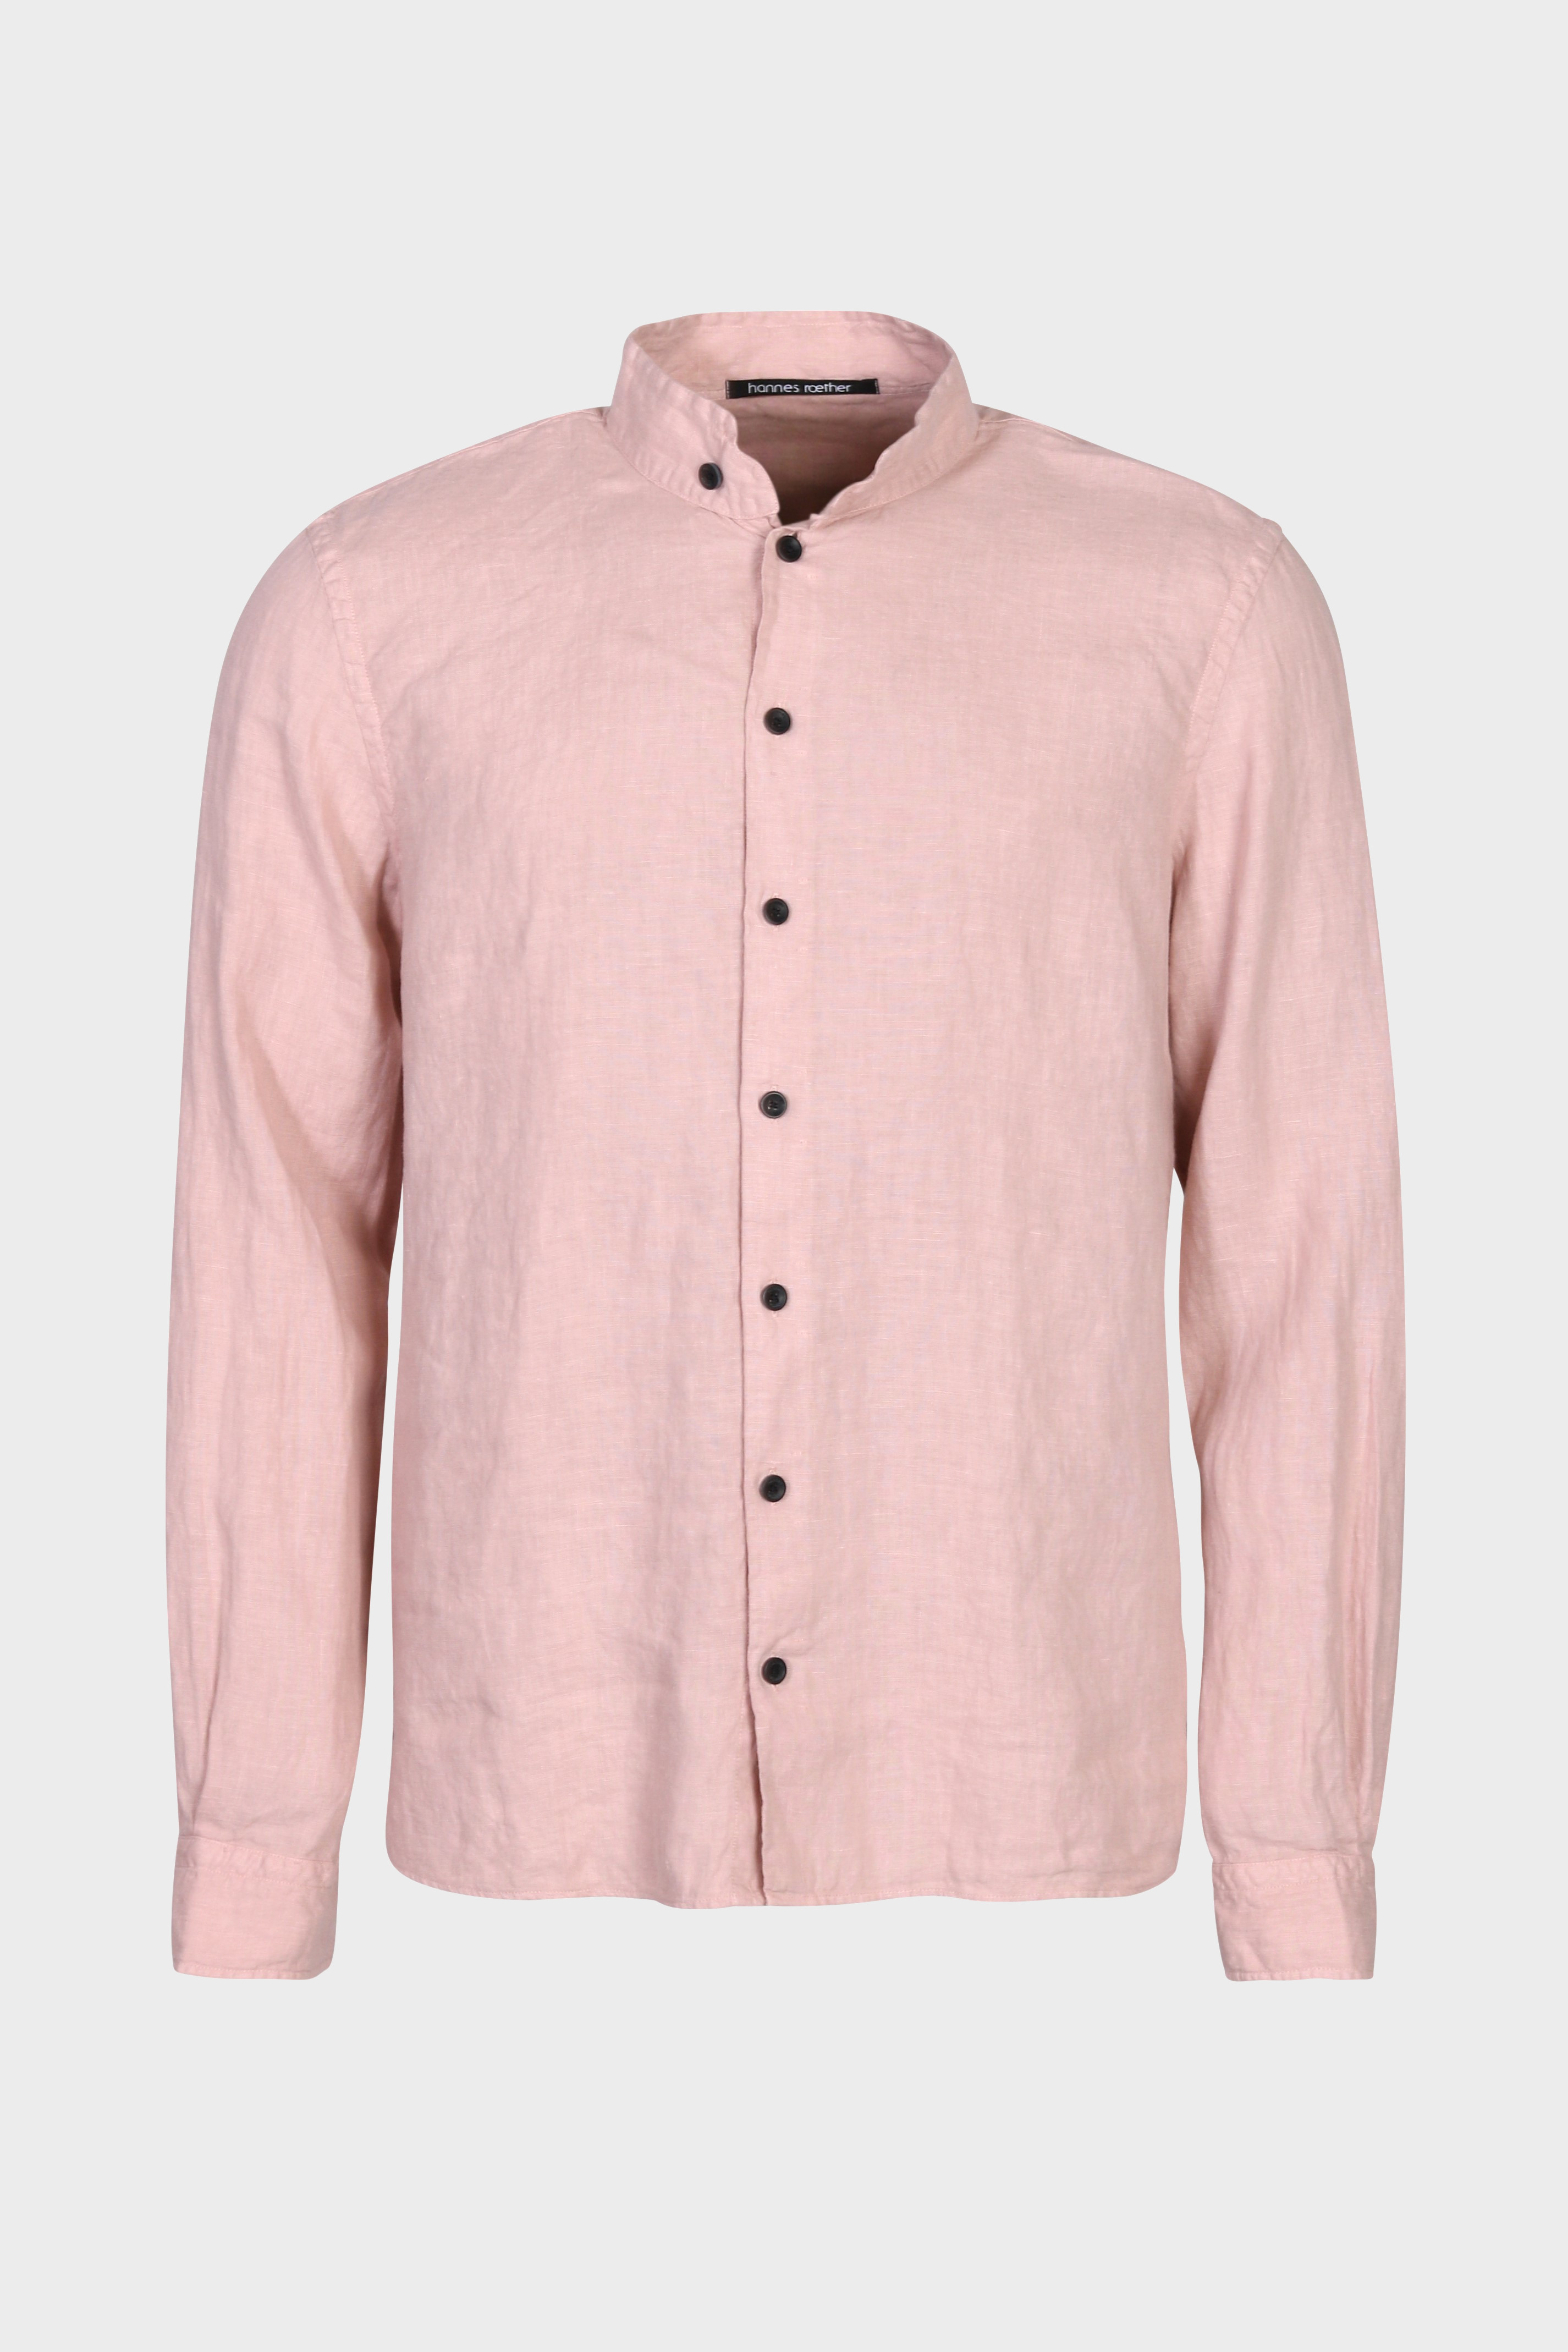 HANNES ROETHER Linen Shirt in Rosé